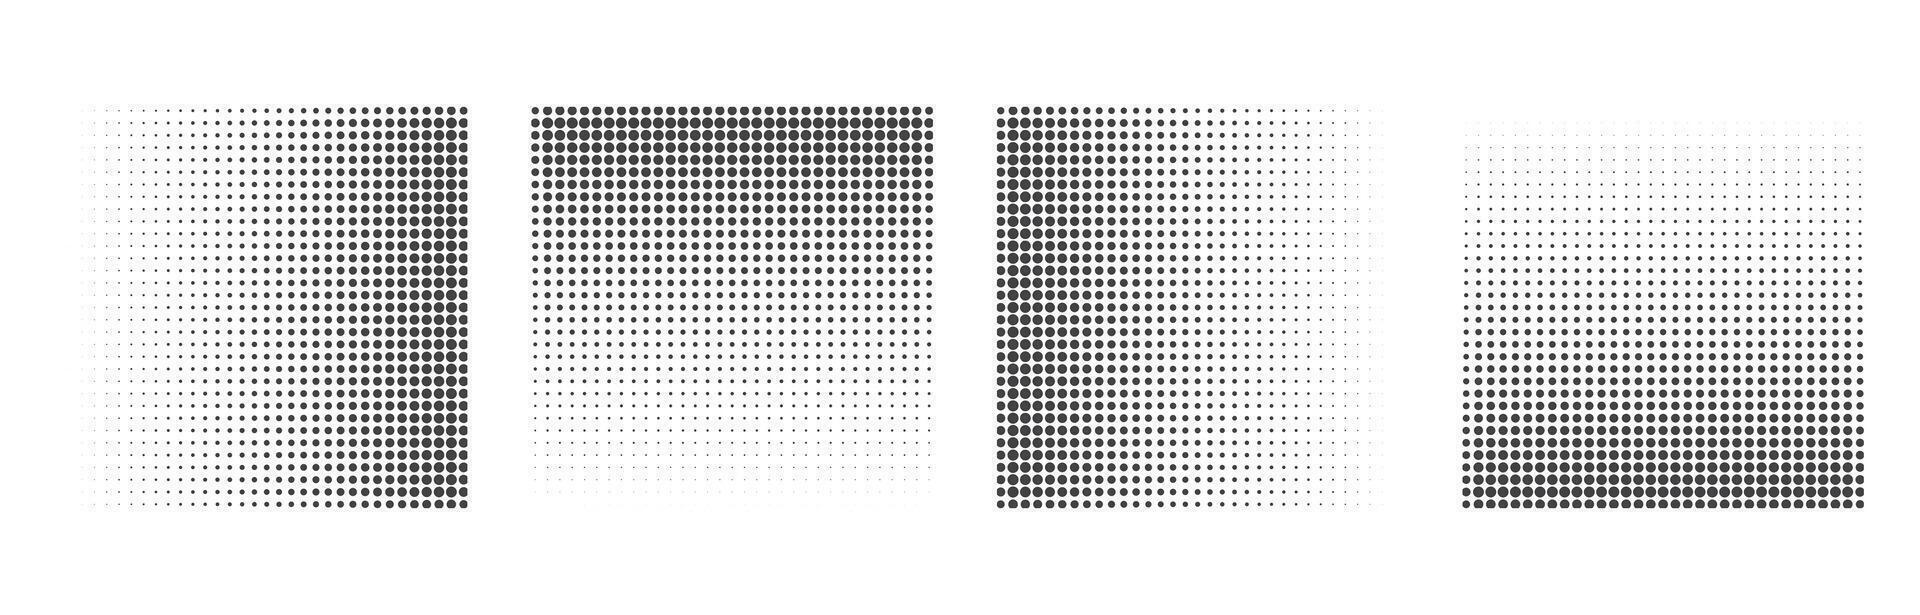 Abstract grunge halftone square shapes background design vector